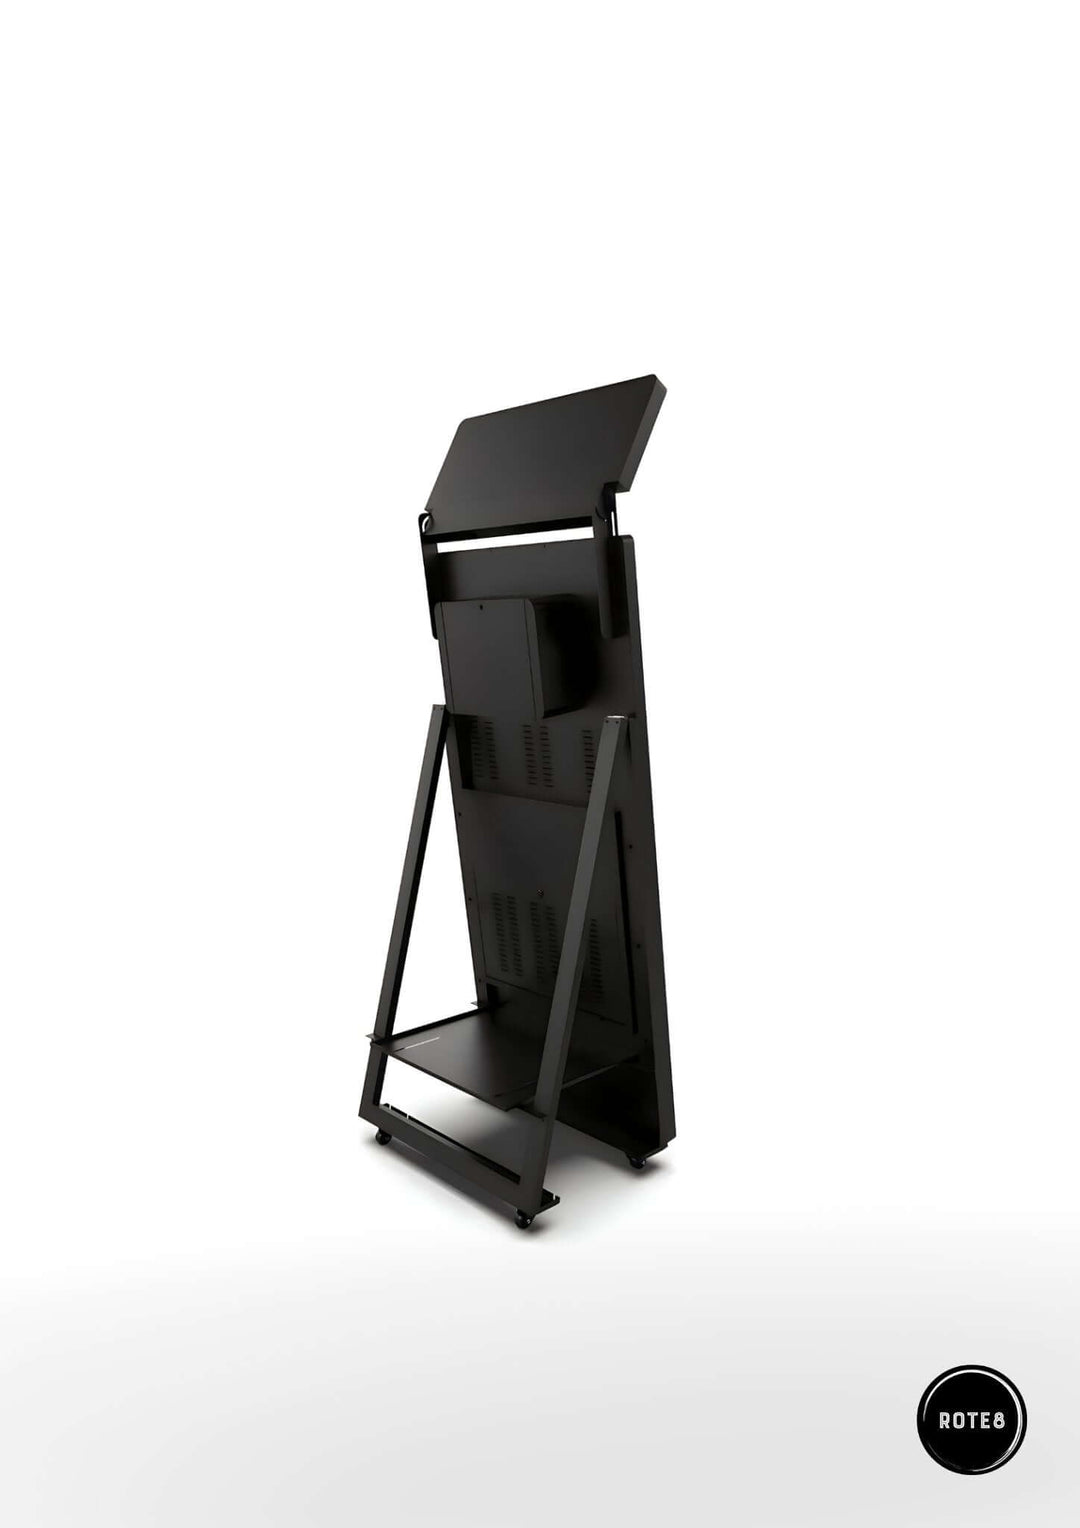 mirror photo booth stand with a black finish. Portable mirror photo booth set up in studio, showcasing its compact and mobile design.